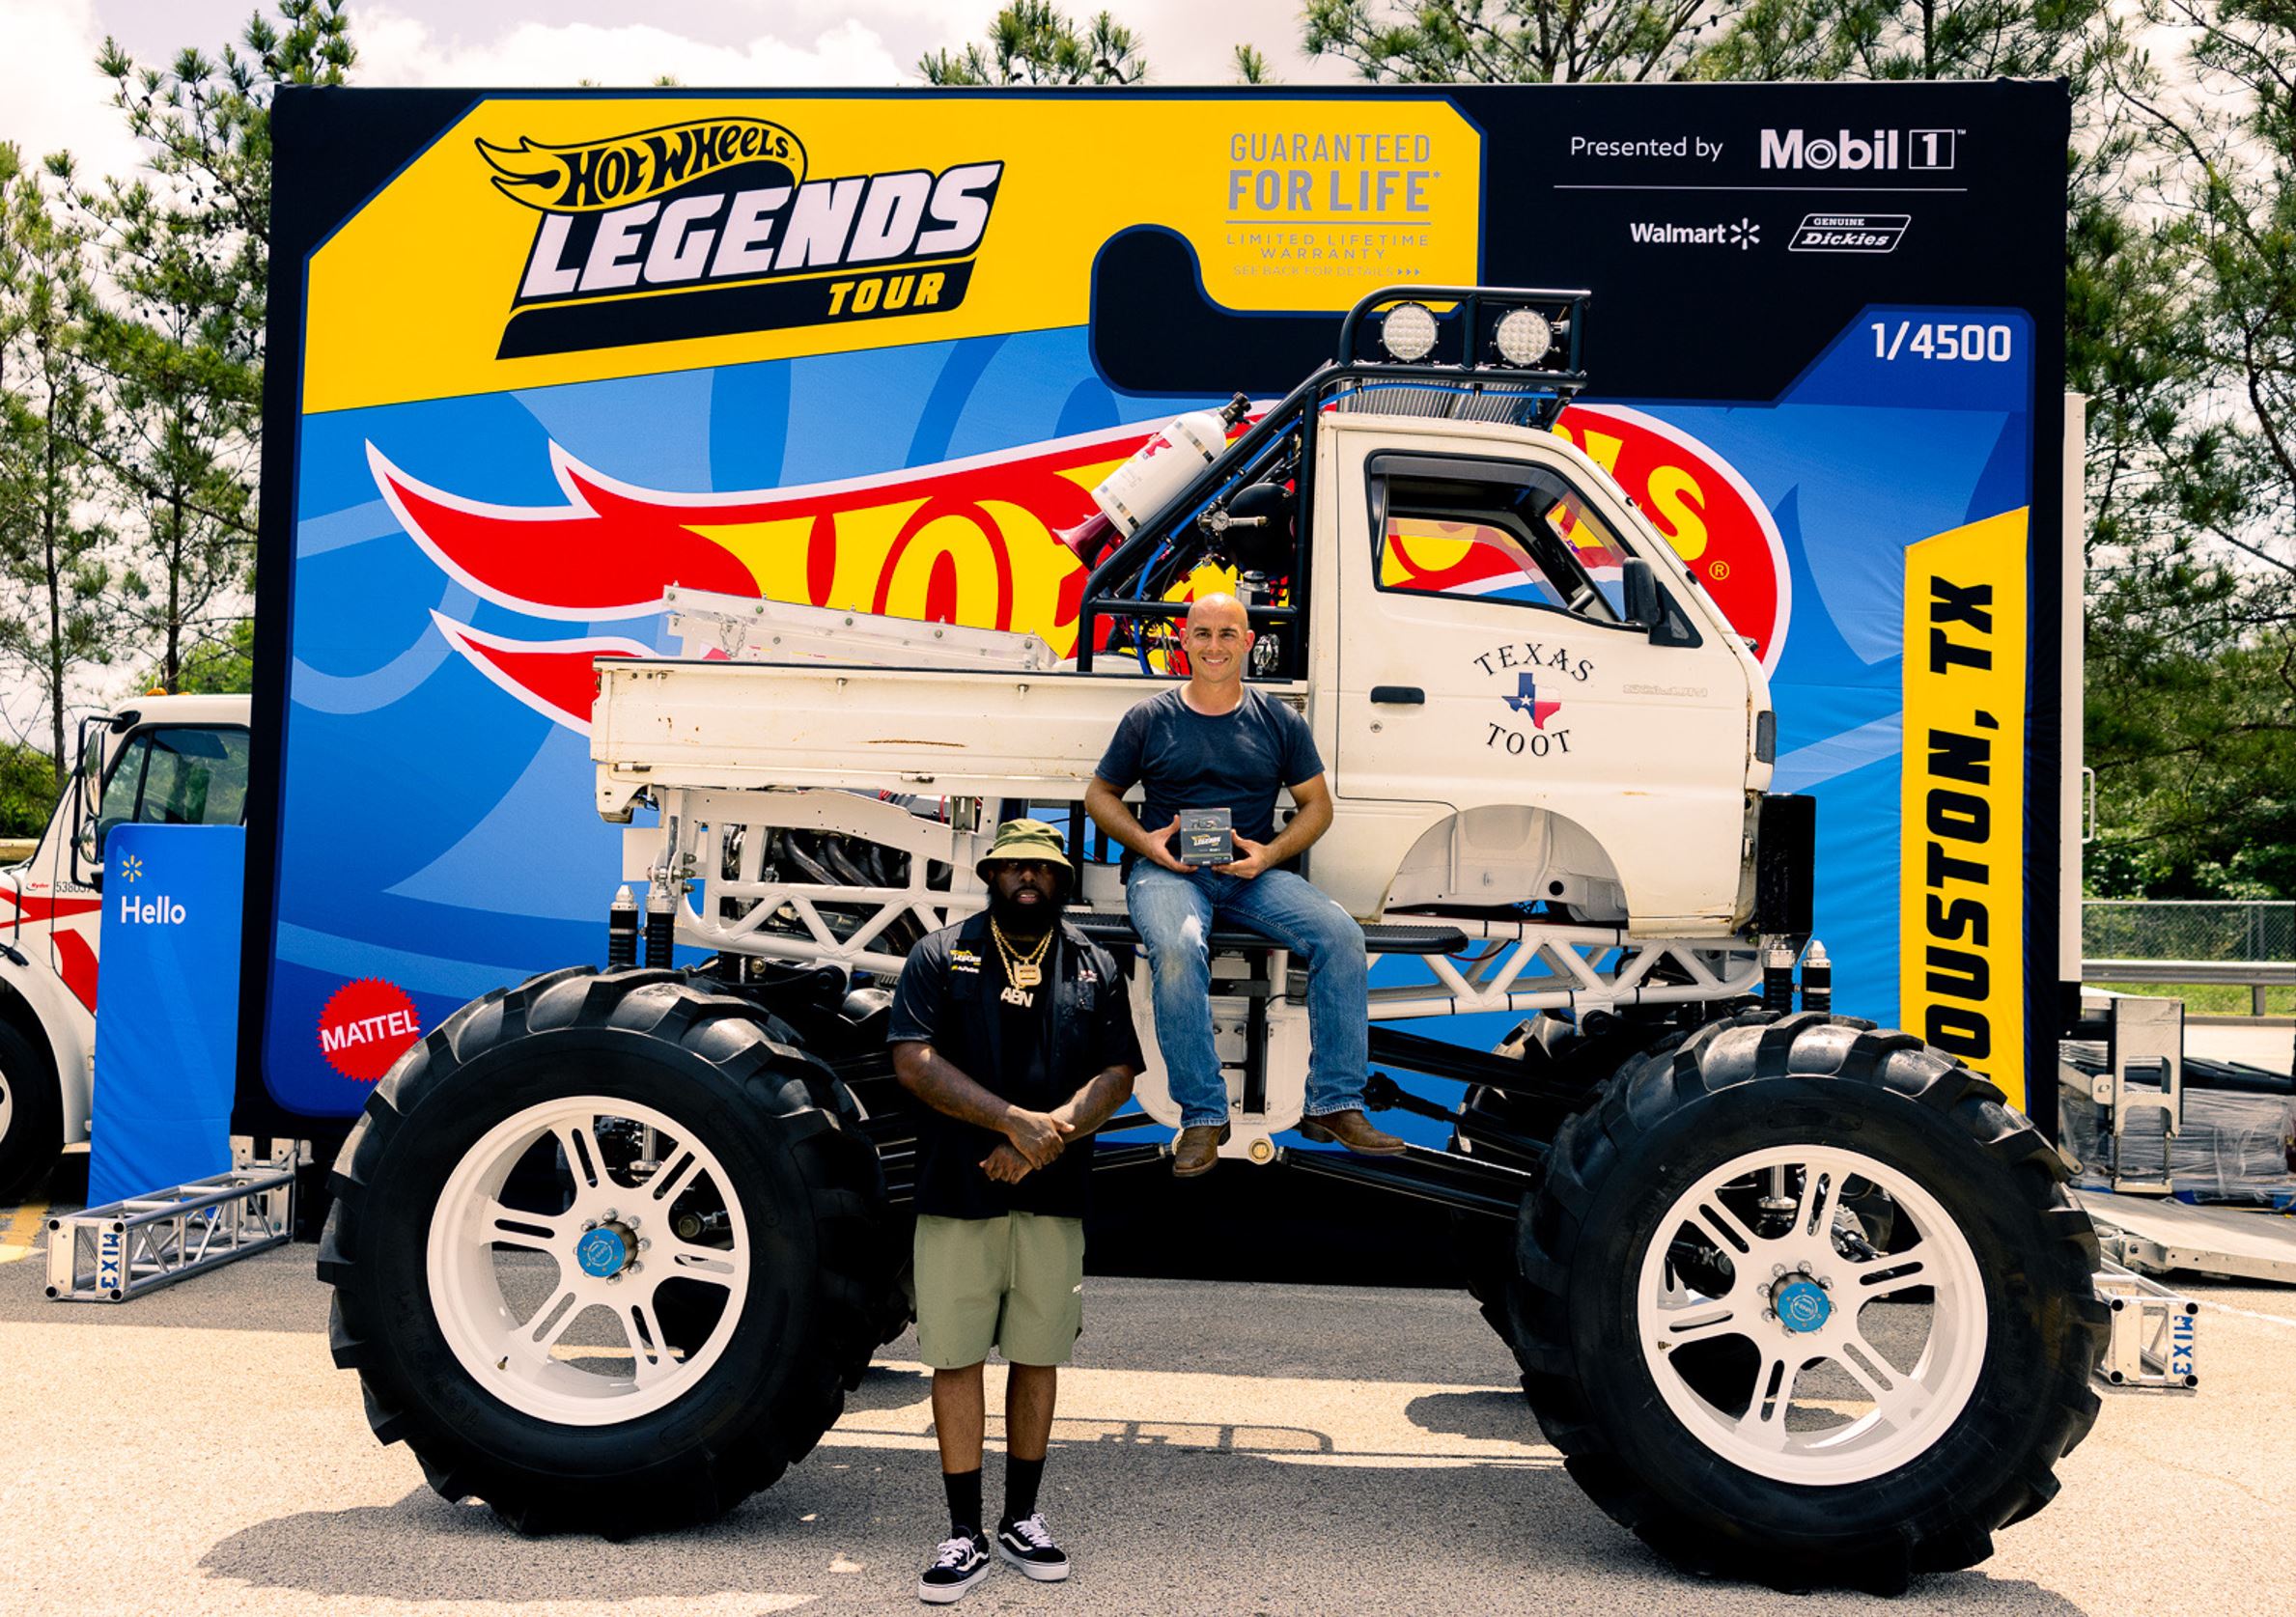 Hot Wheels™ Legends Tour Presented by Mobil 1 Returns in Global